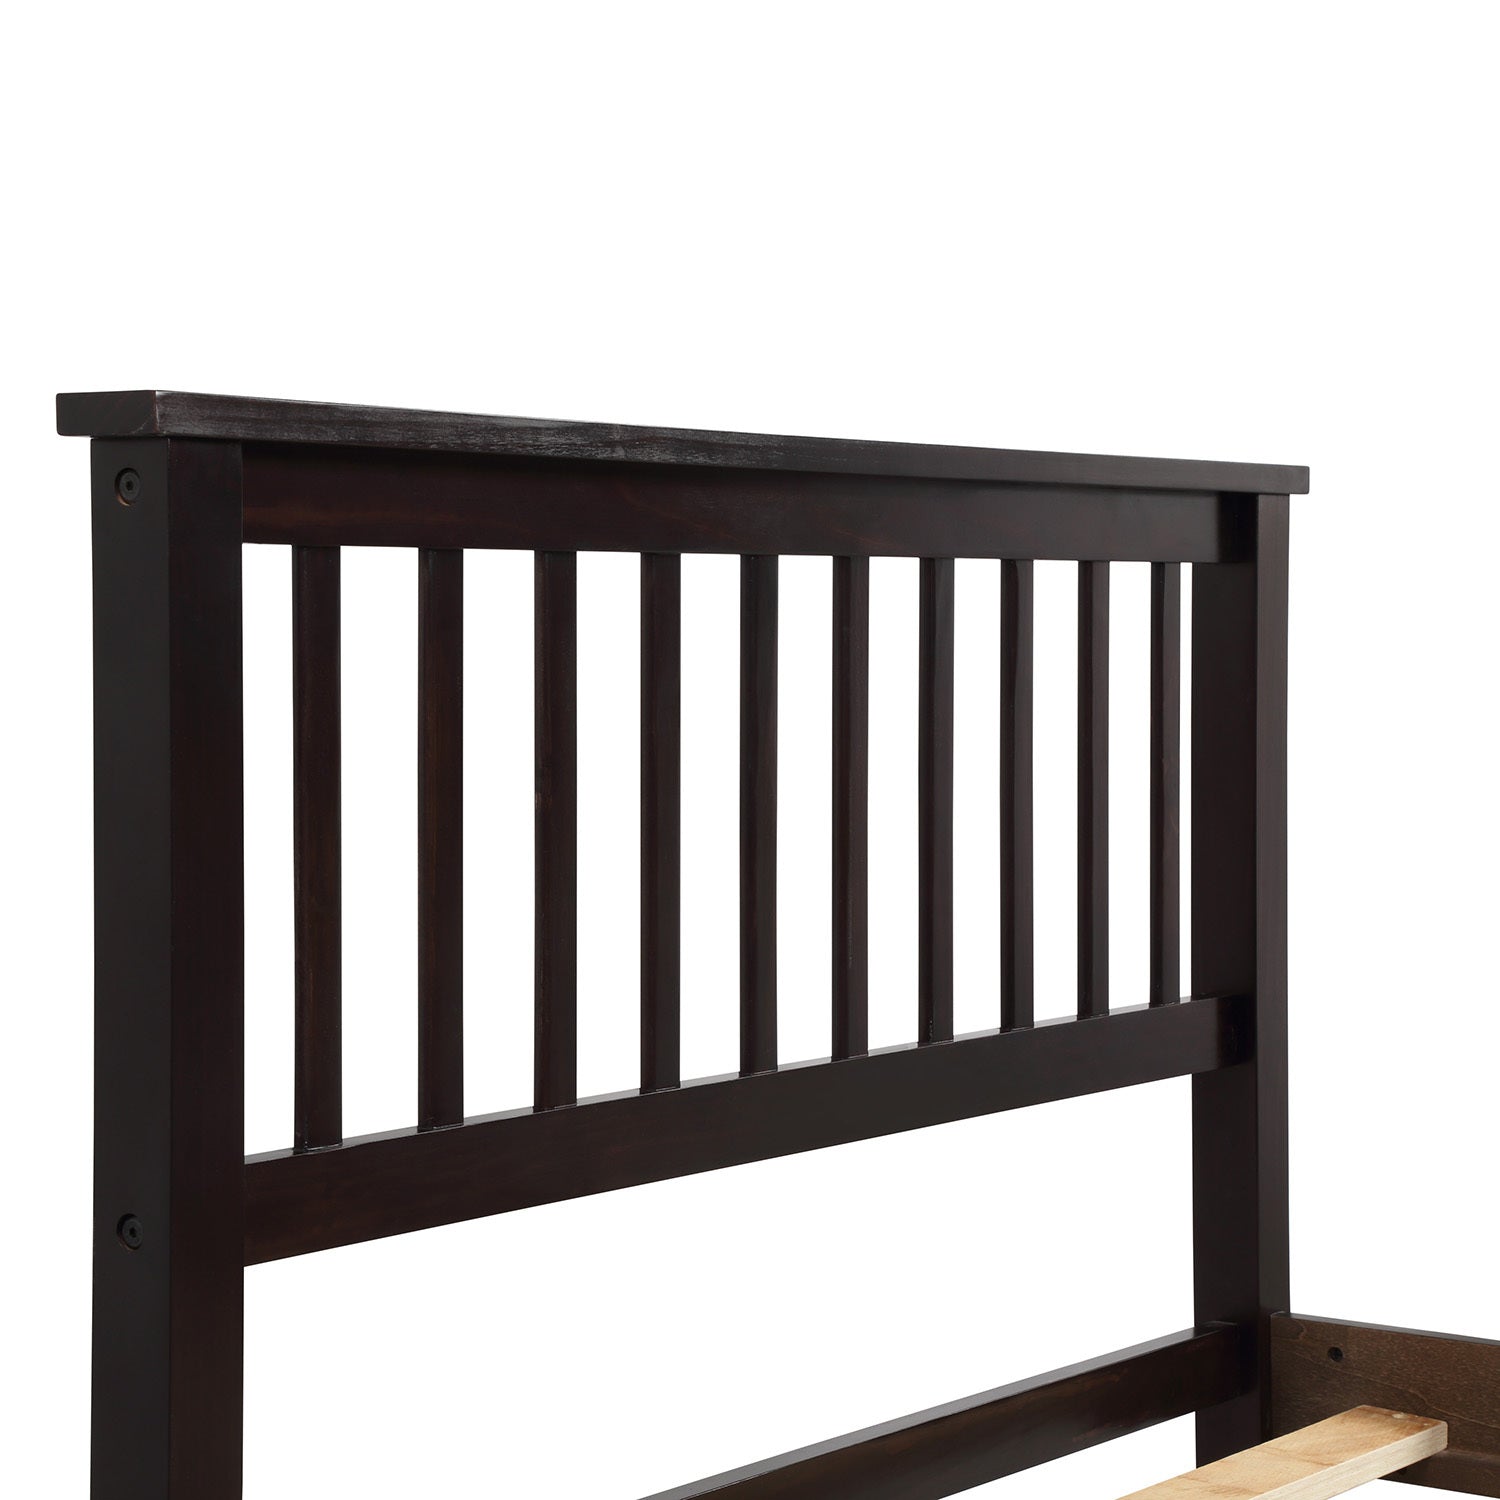 Wood Platform Twin Bed with Headboard and Footboard | Espresso Finish | Sturdy Construction